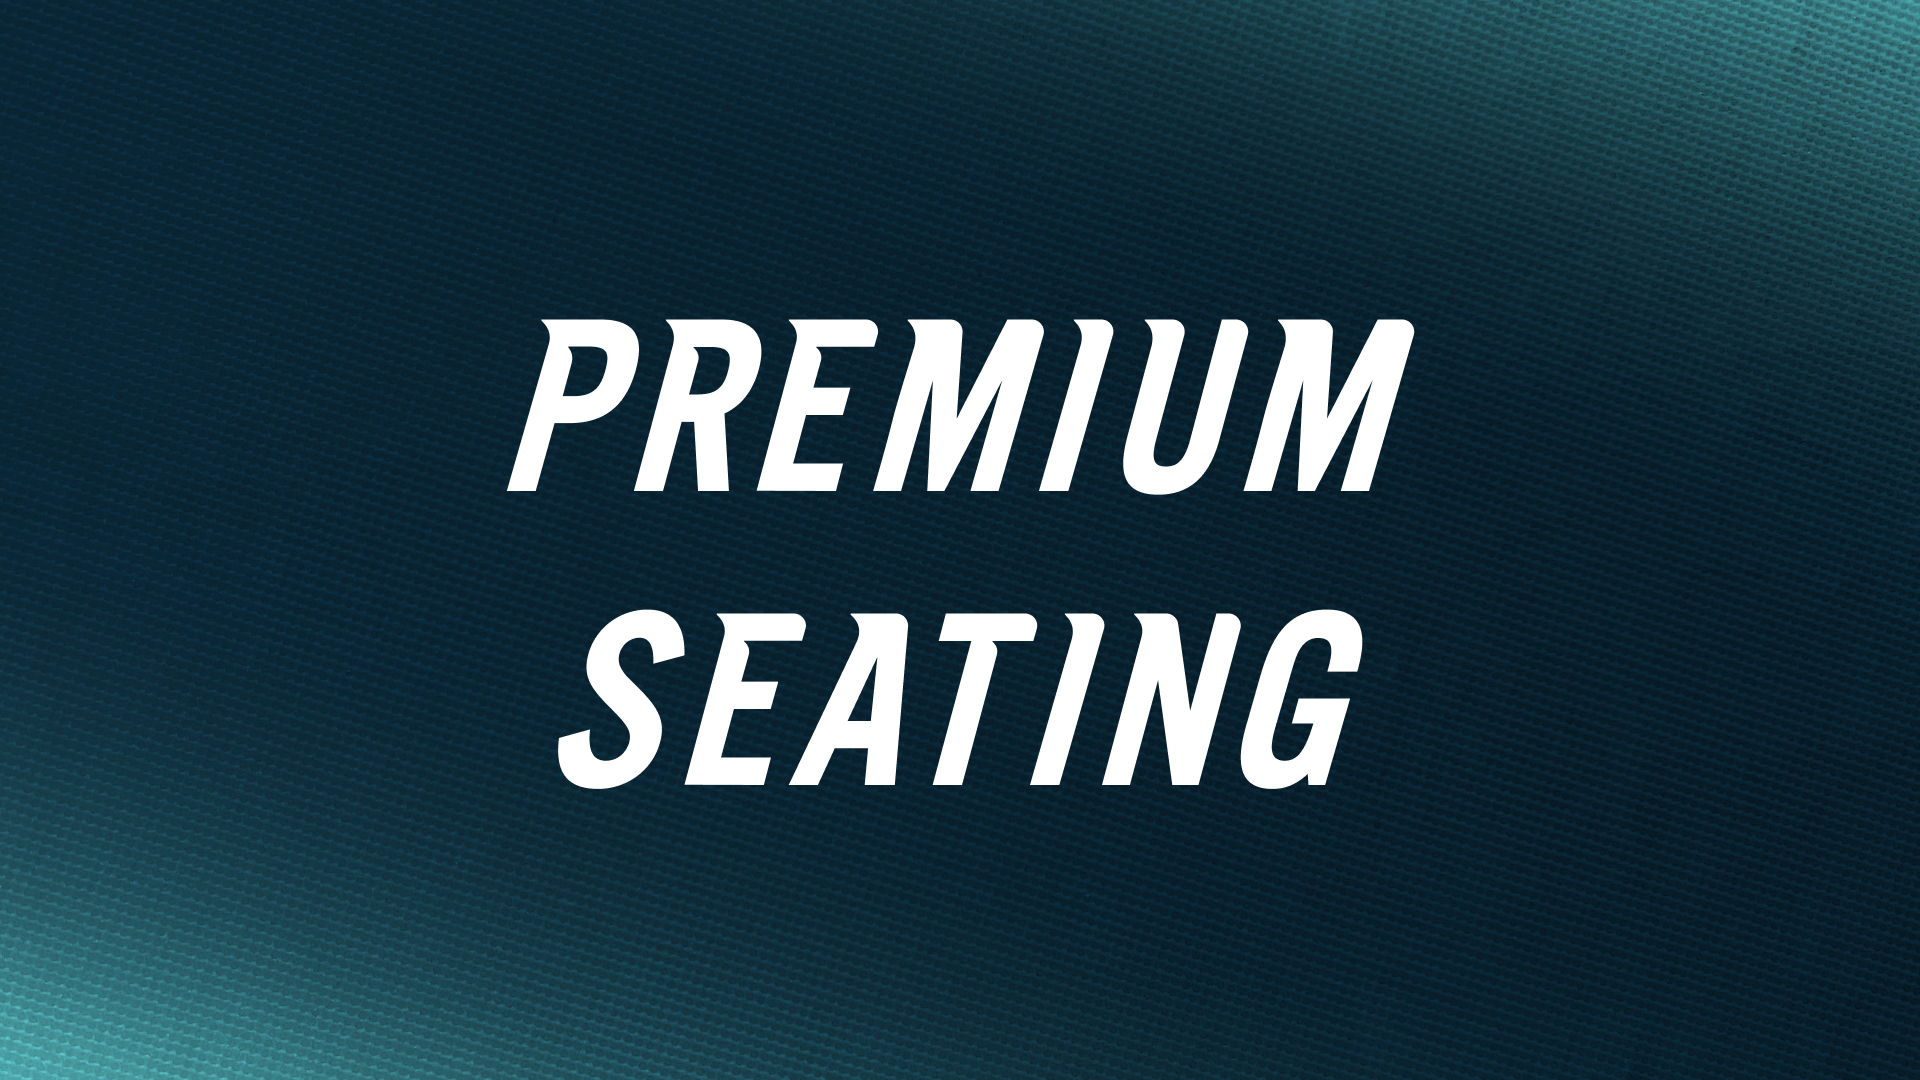 A graphic that says "Premium Seating"  and links to a page to learn more and purchase.